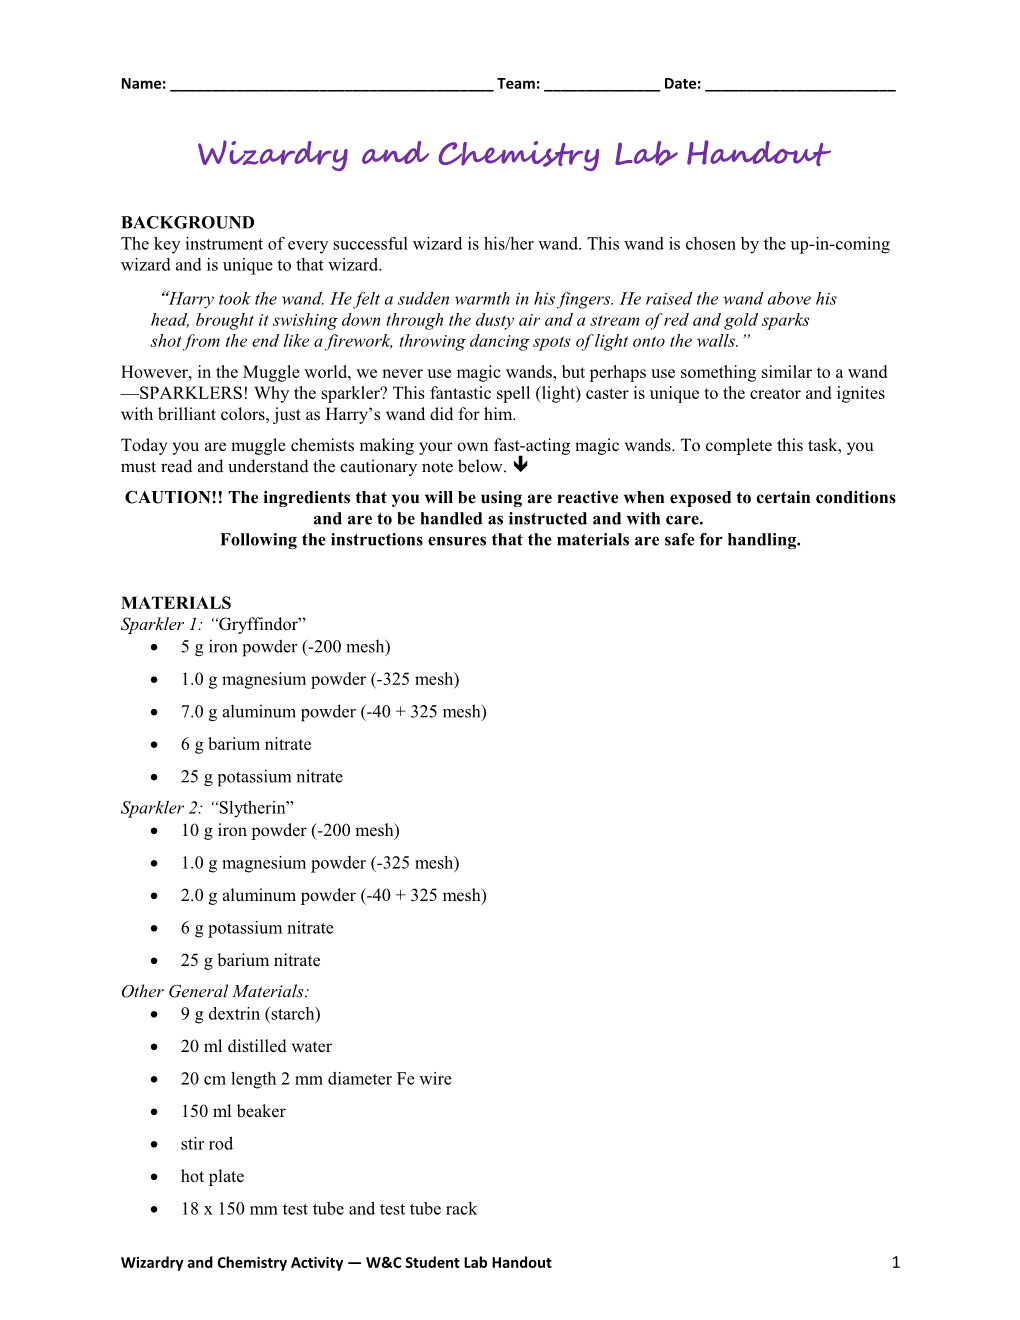 Wizardry and Chemistry Lab Handout